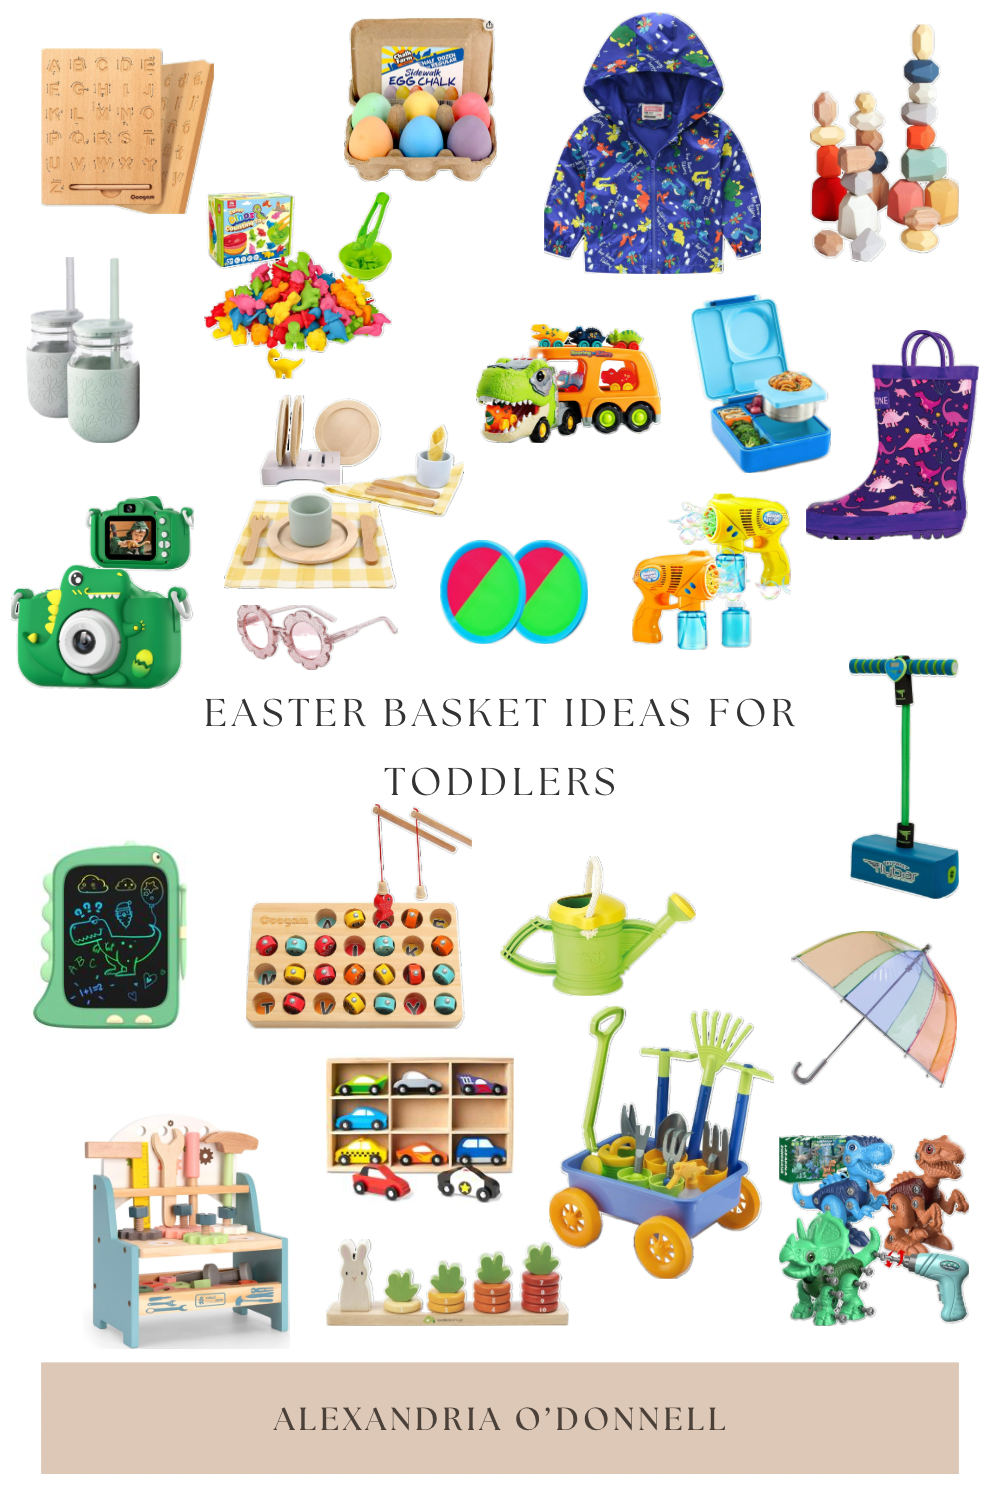 Easter Basket Ideas for Toddlers